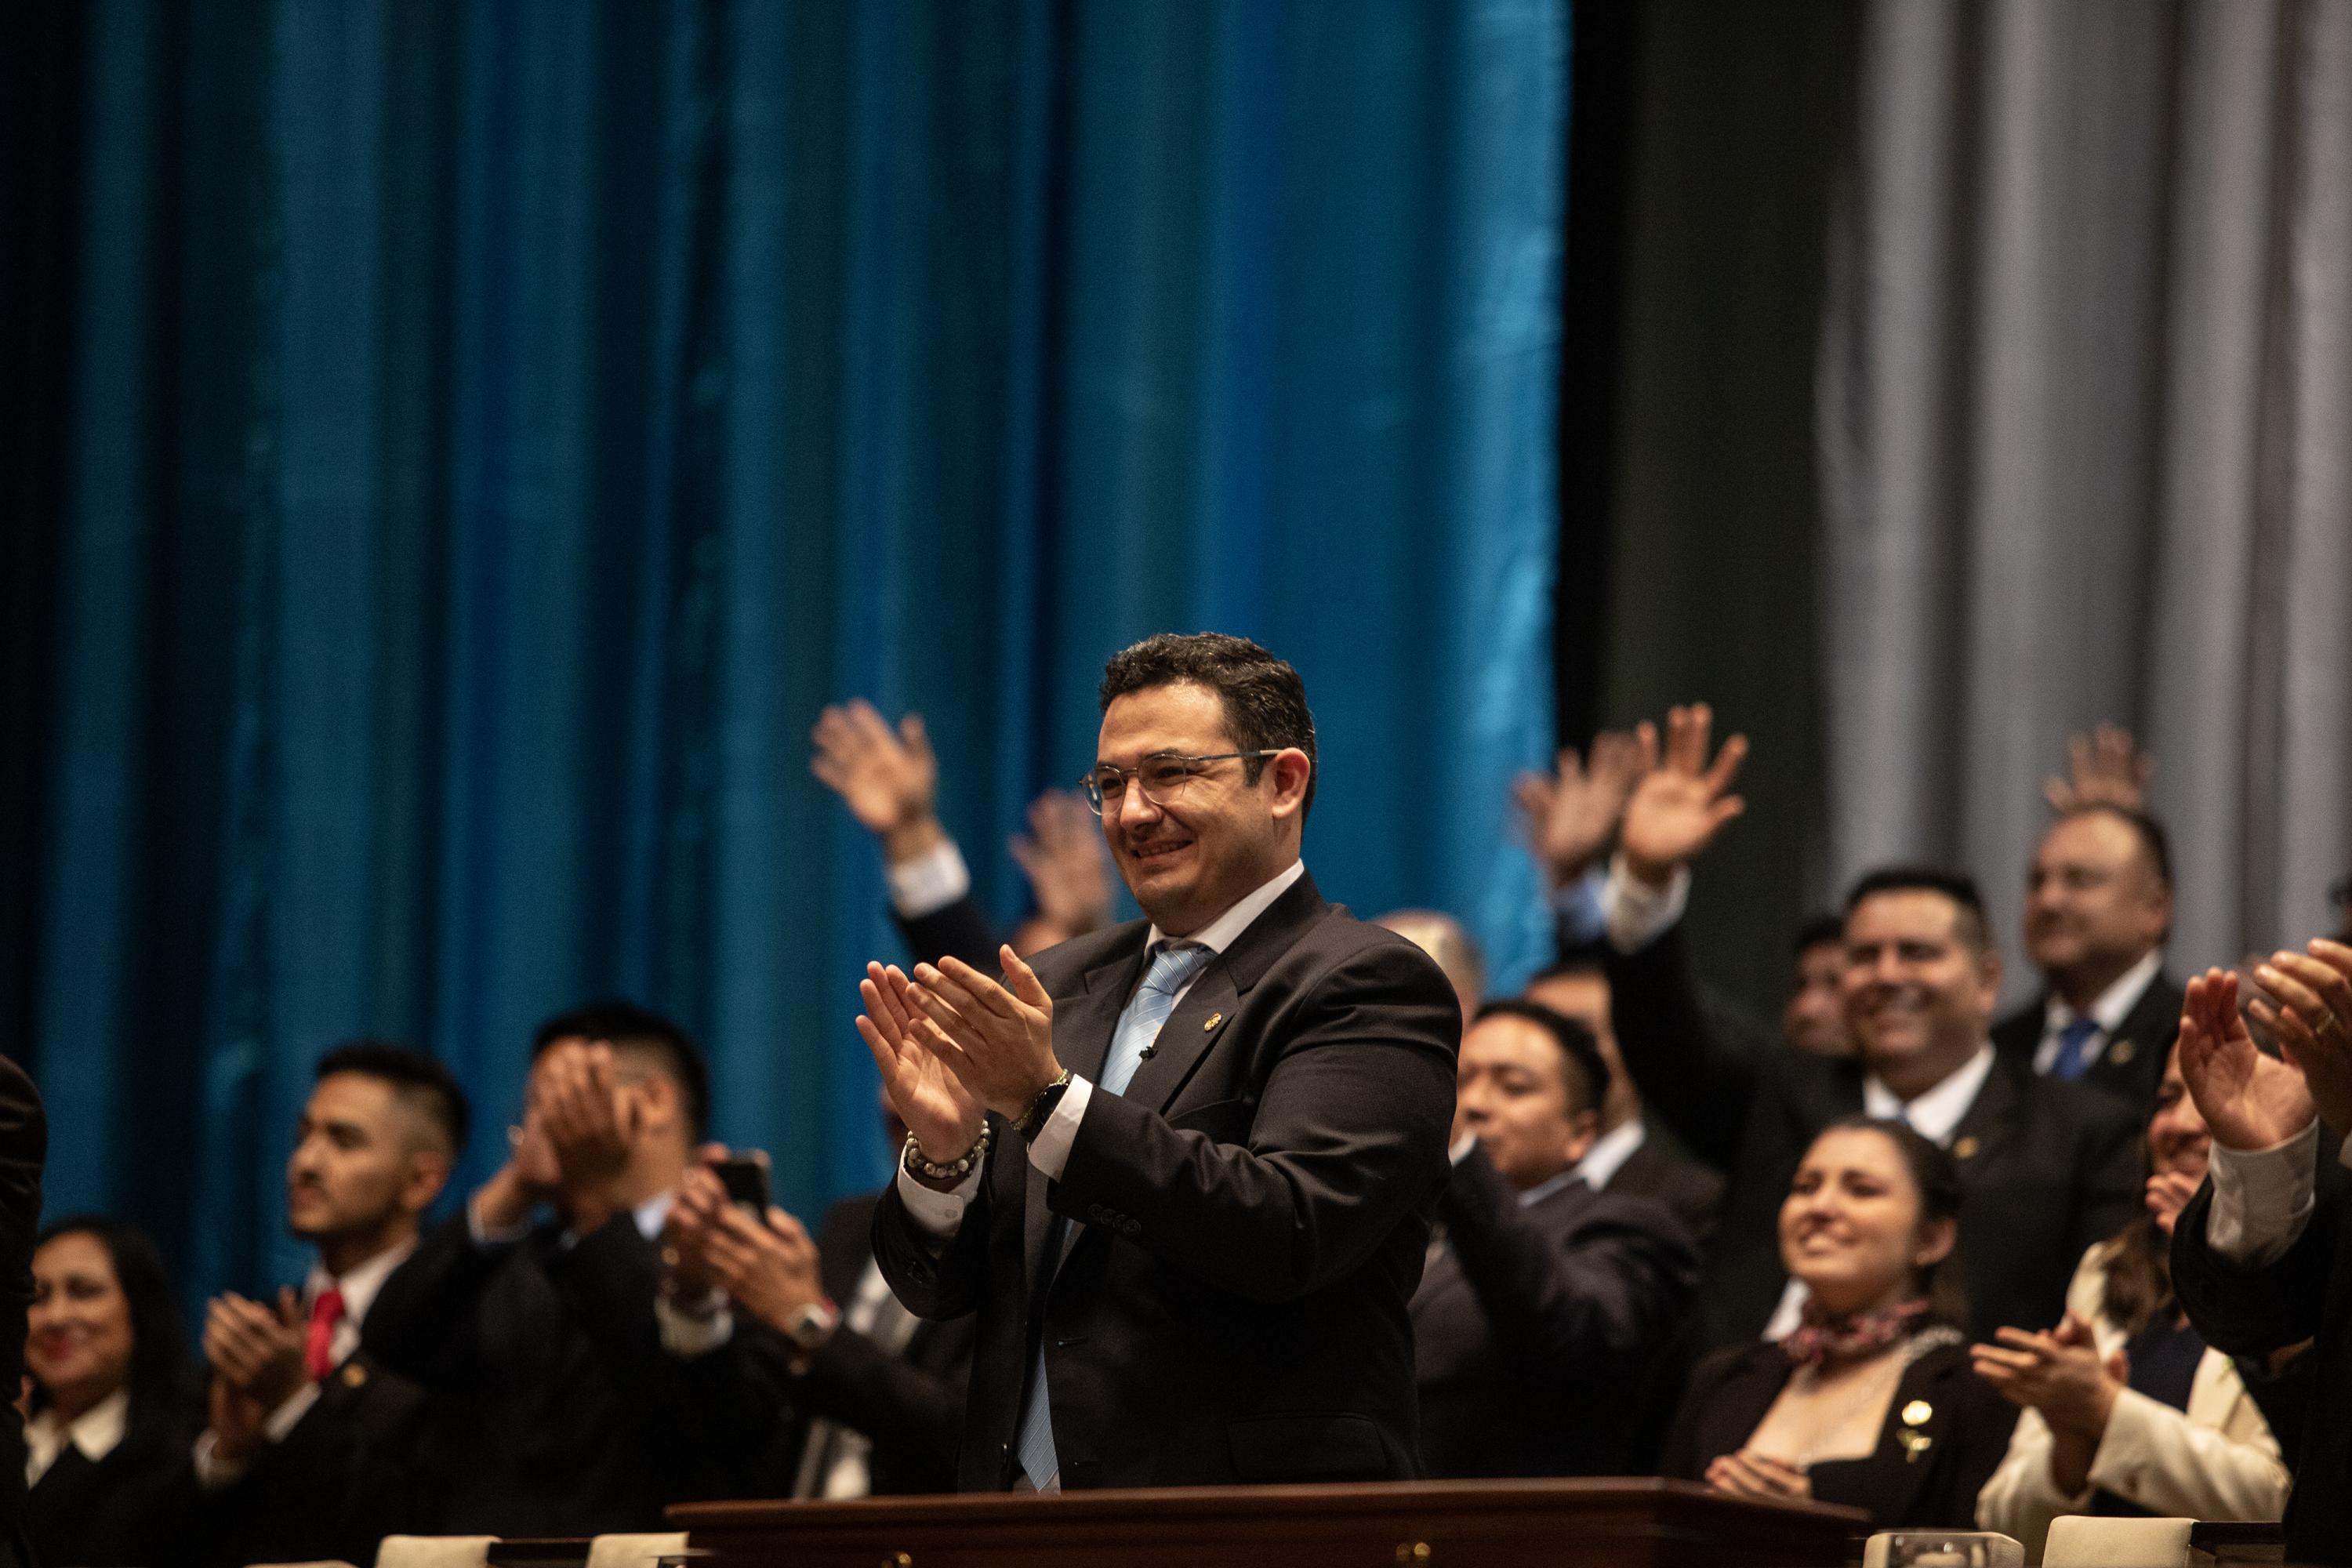 Legislator Samuel Pérez of the Semilla party was chosen as president of the Guatemalan Congress on Jan. 14, 2024. But the Constitutional Court quickly intervened to annul the new Executive Board, and the party of President Bernardo Arévalo has since been temporarily suspended, stripped of its right to compete for senior leadership or committee positions. Photo Carlos Barrera